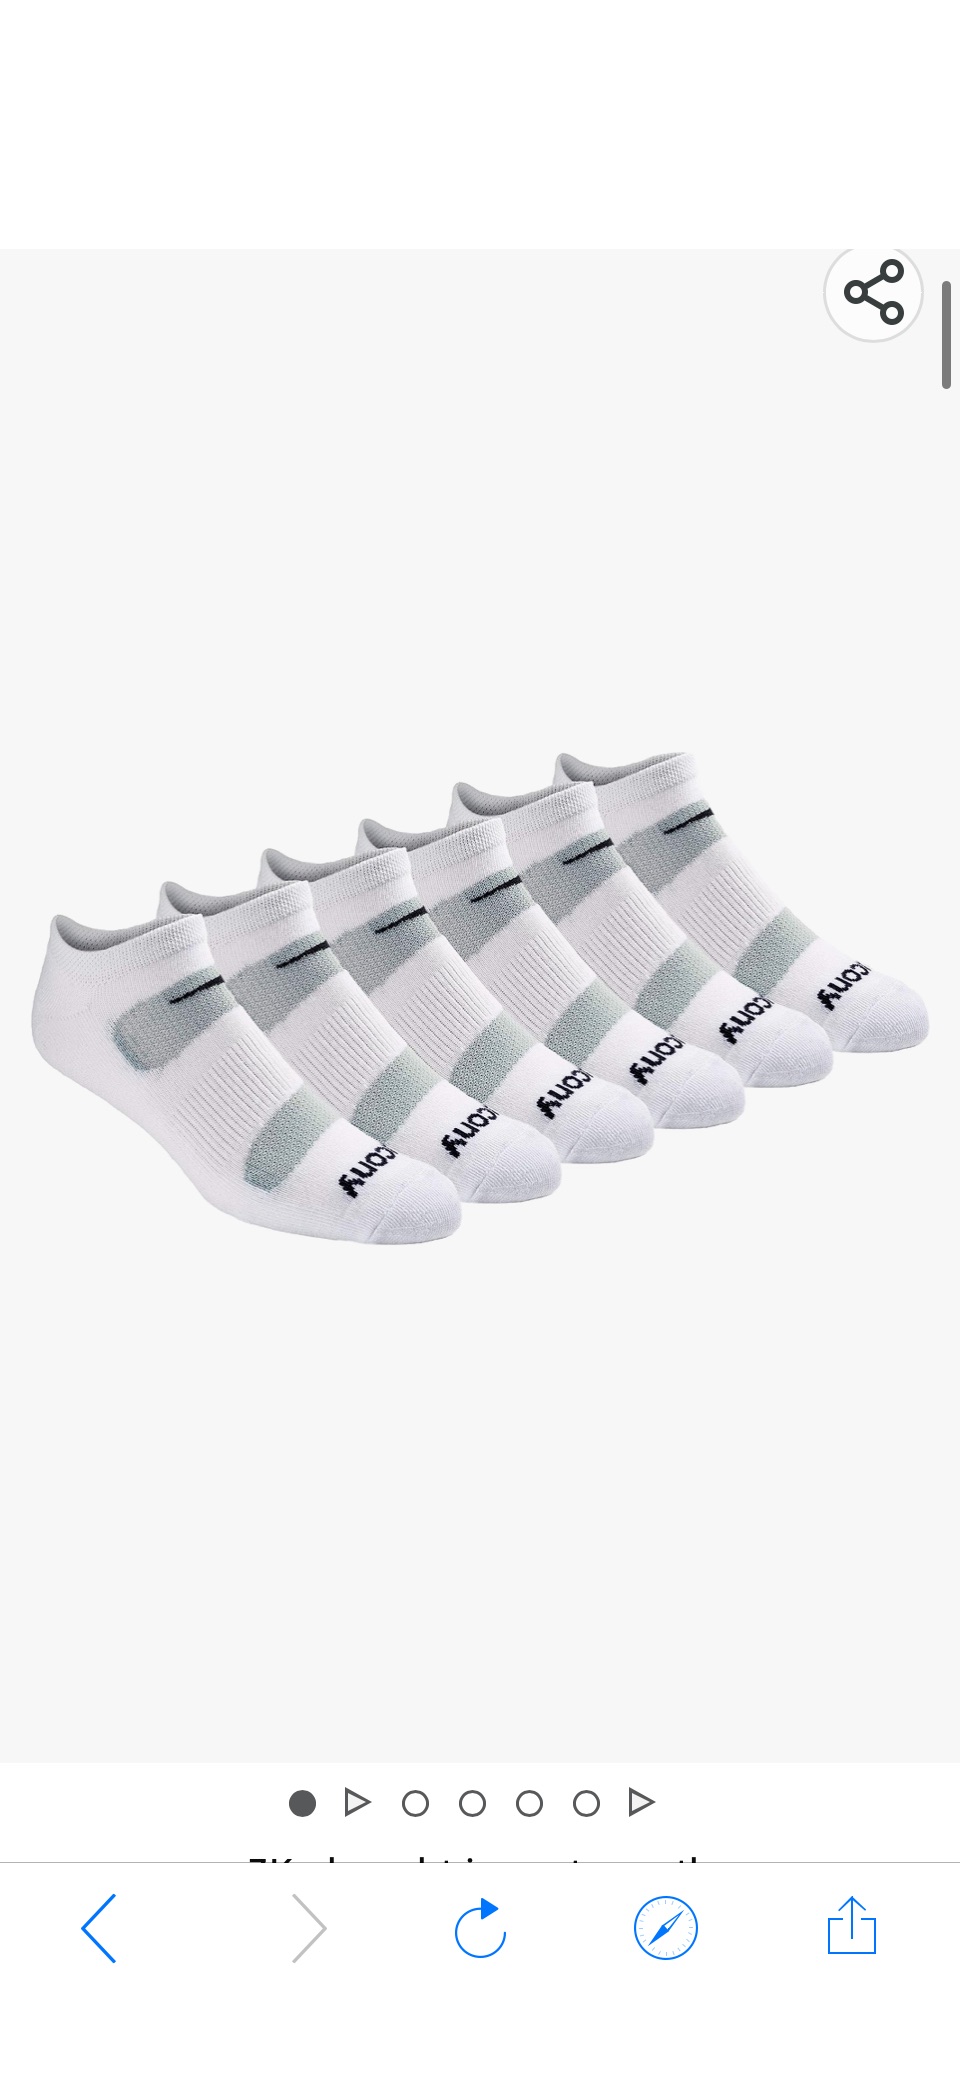 Amazon.com: Saucony Men's Multi-Pack Mesh Ventilating Comfort Fit Performance No-Show Socks, White (6 Pairs), Shoe Size 8-12 : Clothing, Shoes & Jewelry原价14.99